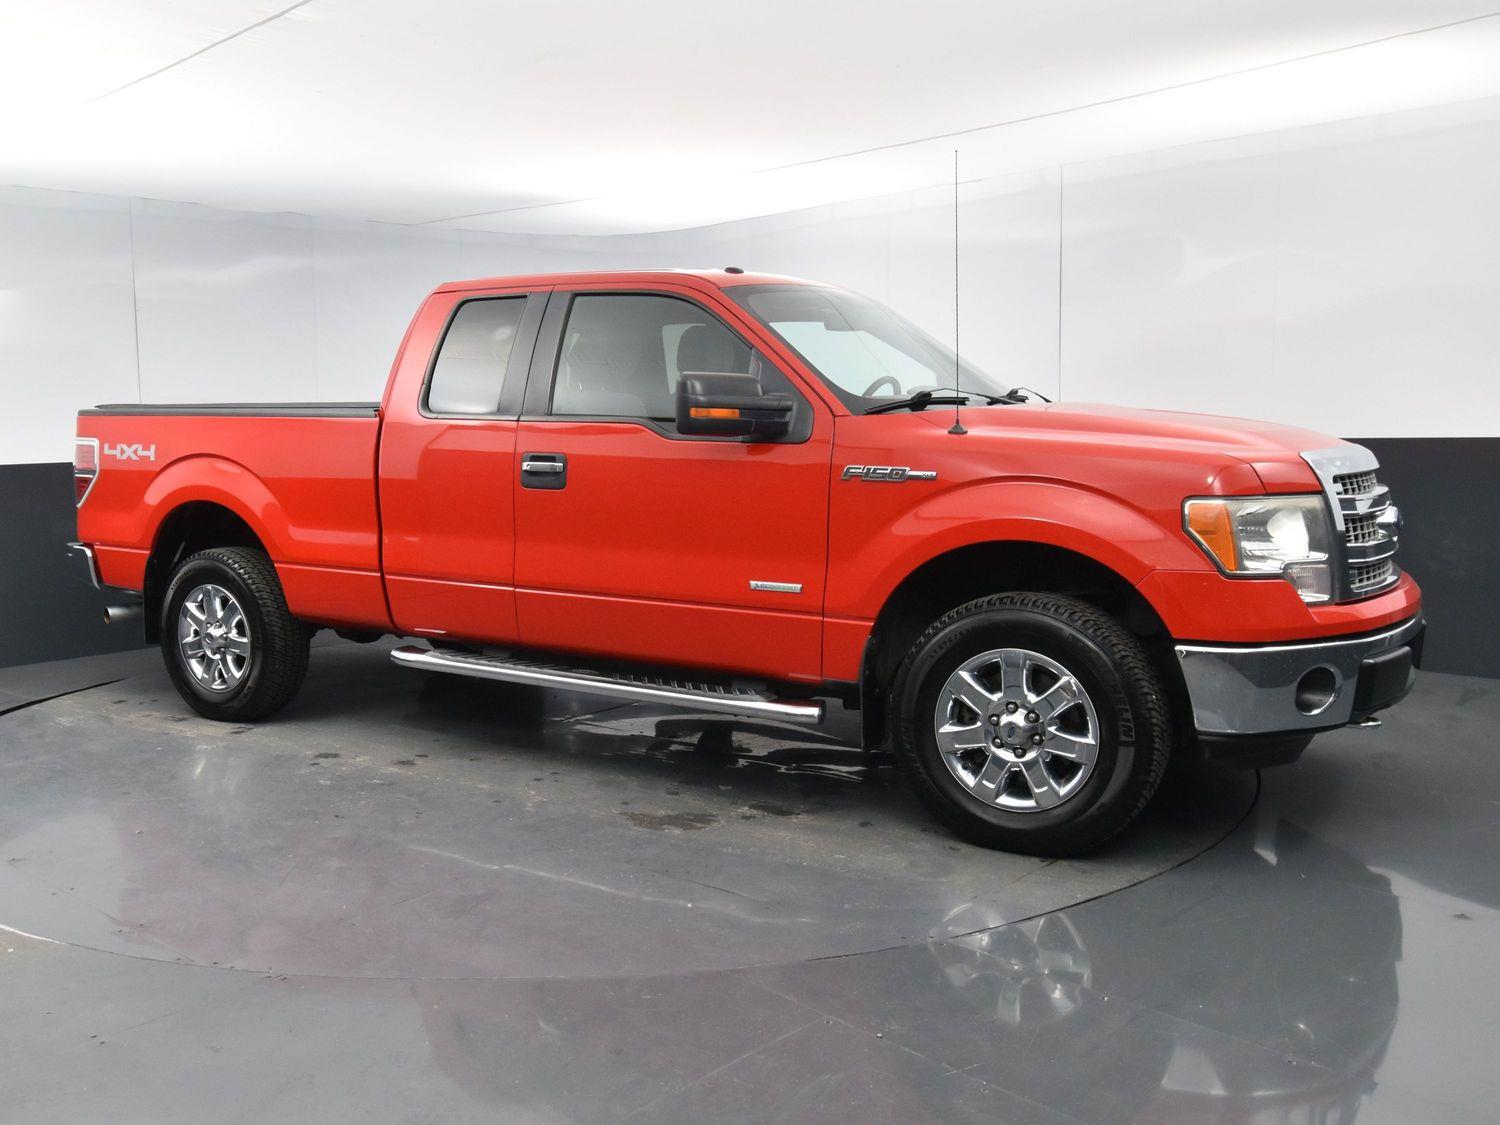 Used 2013 Ford F-150 XLT Extended Cab Truck for sale in Grand Island NE